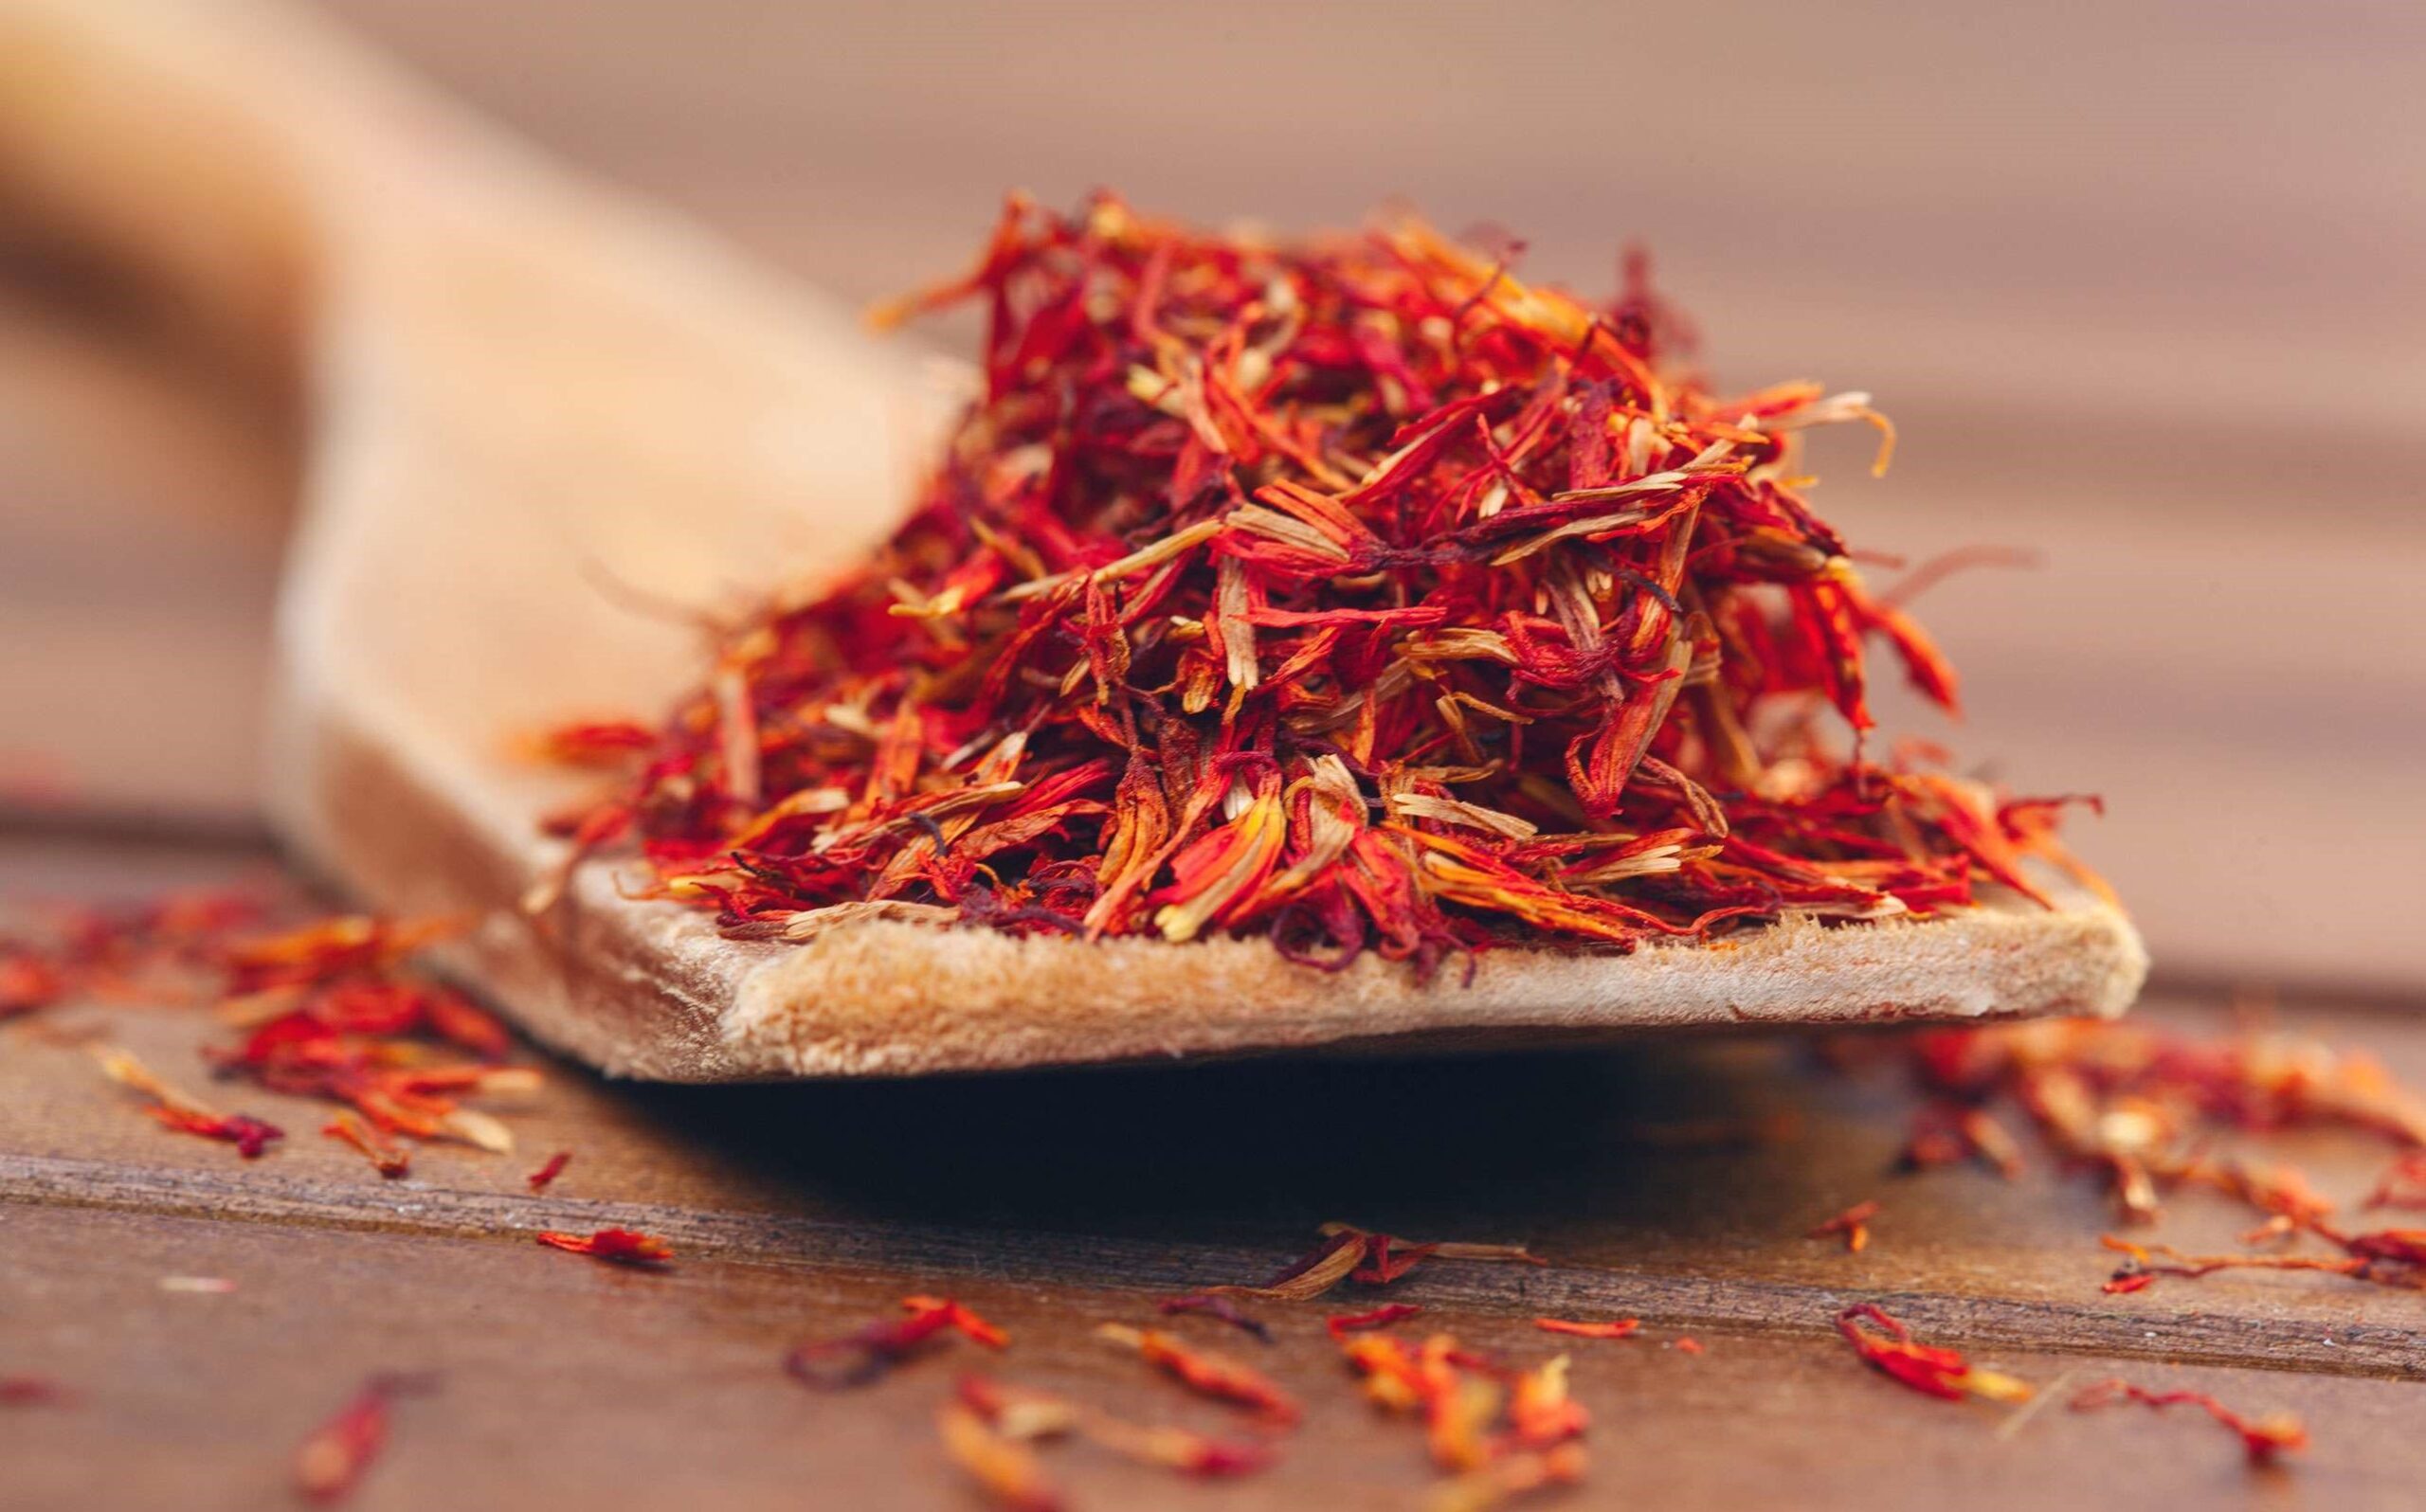 Why is saffron so expensive? Discover more